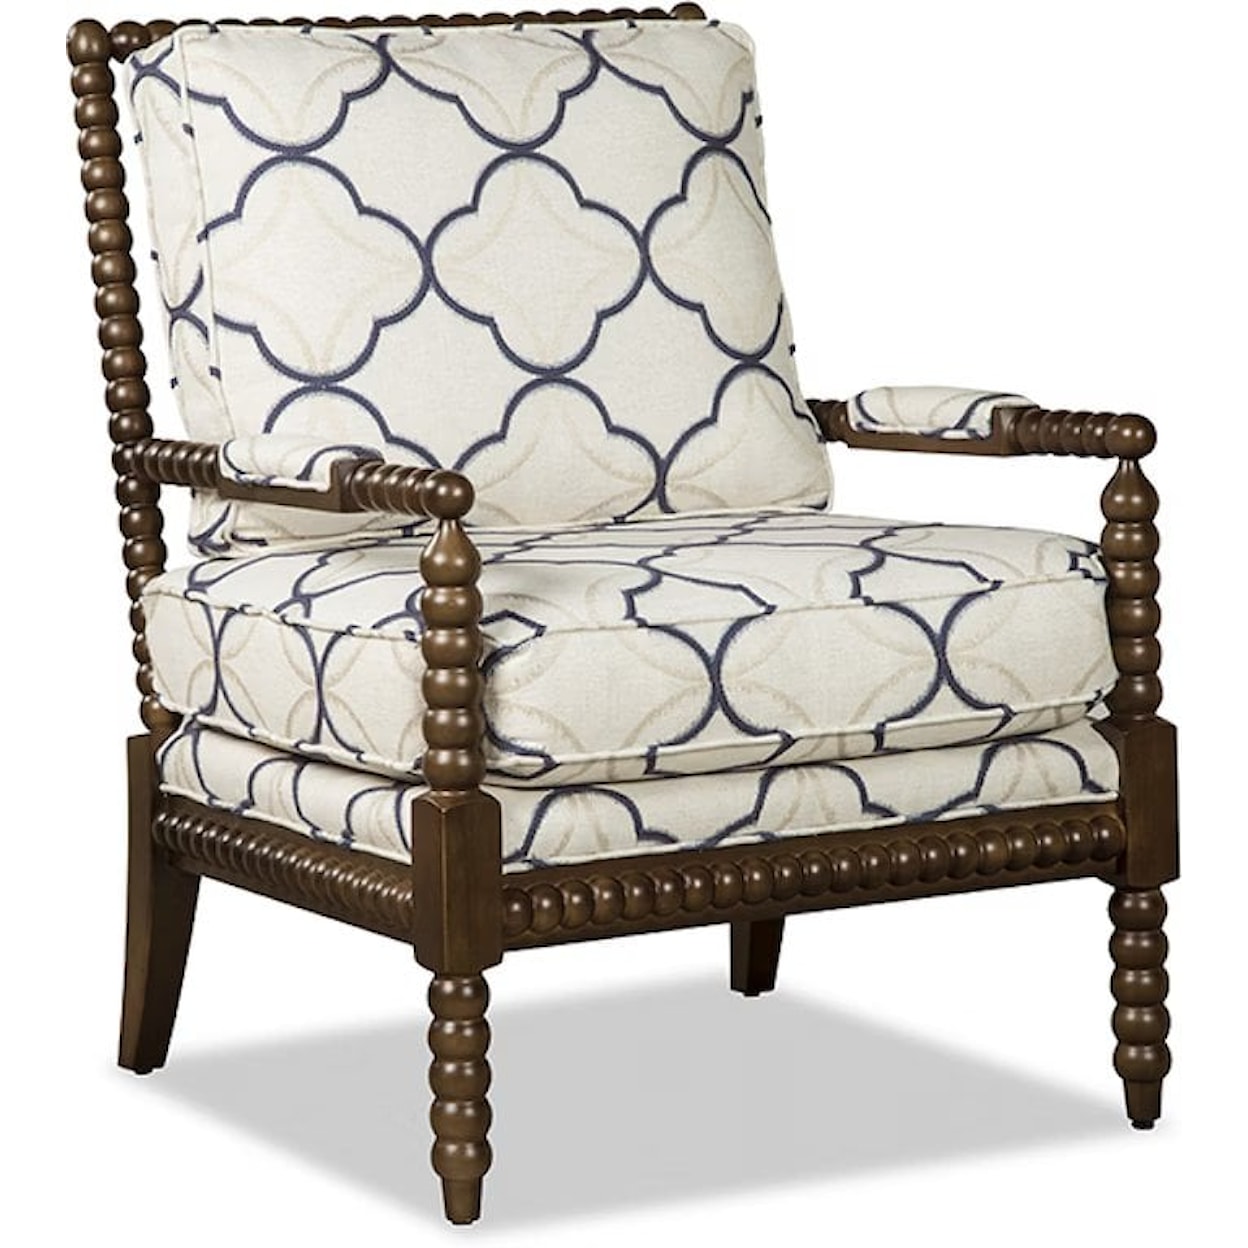 Craftmaster 052410 Exposed Wood Chair